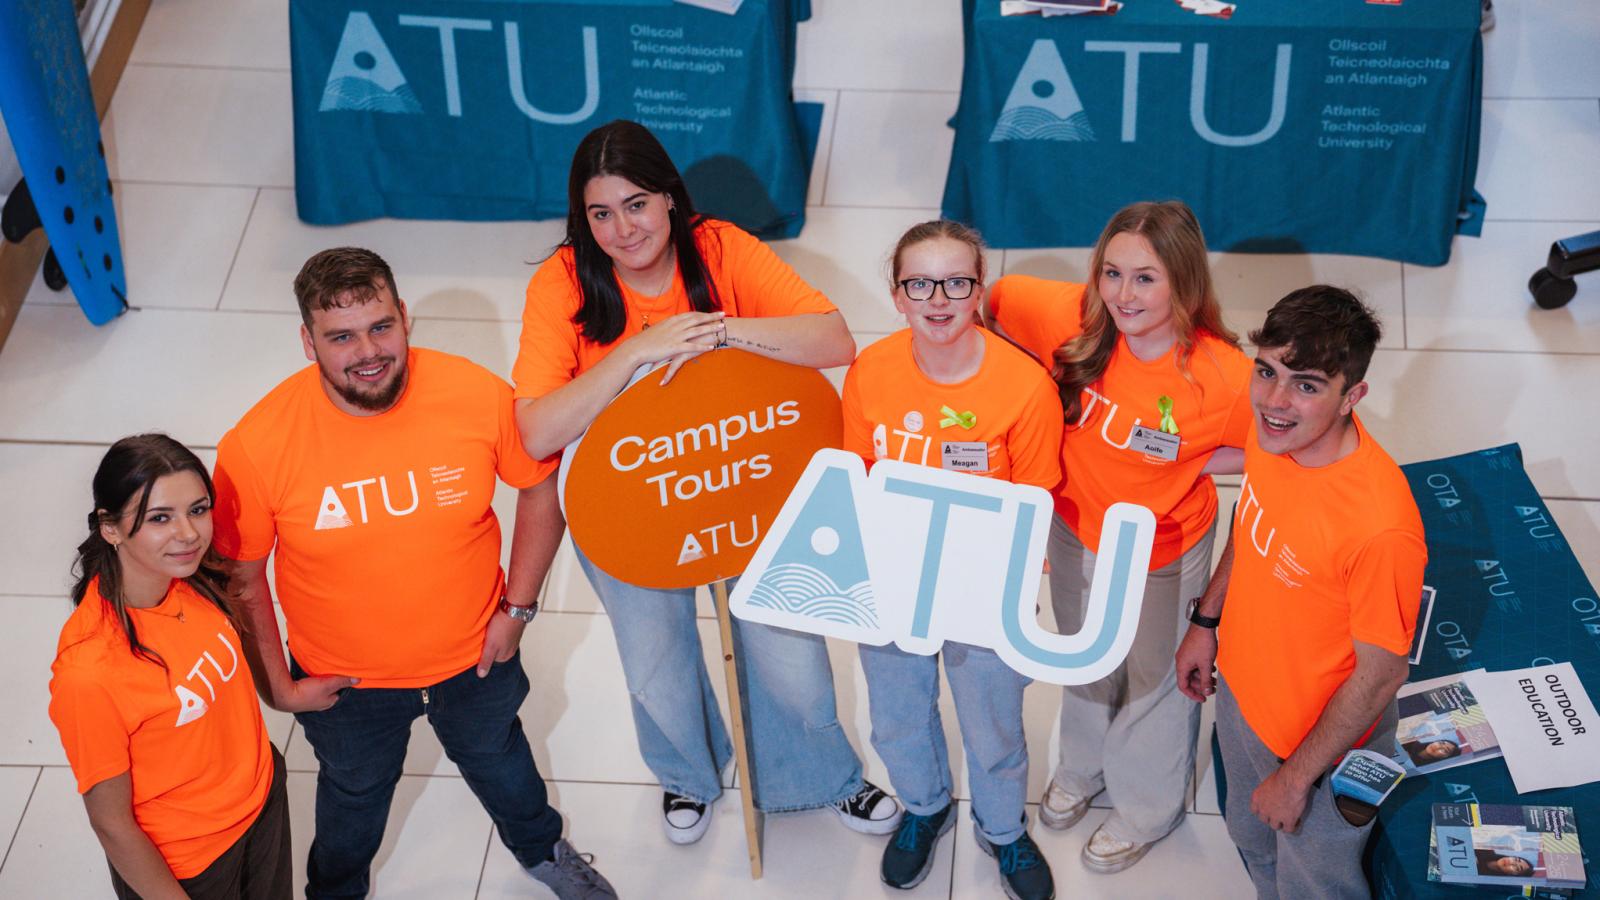 ATU hosts Open Morning at Galway City campuses (Sat 25 Nov, 10am to 1pm) 